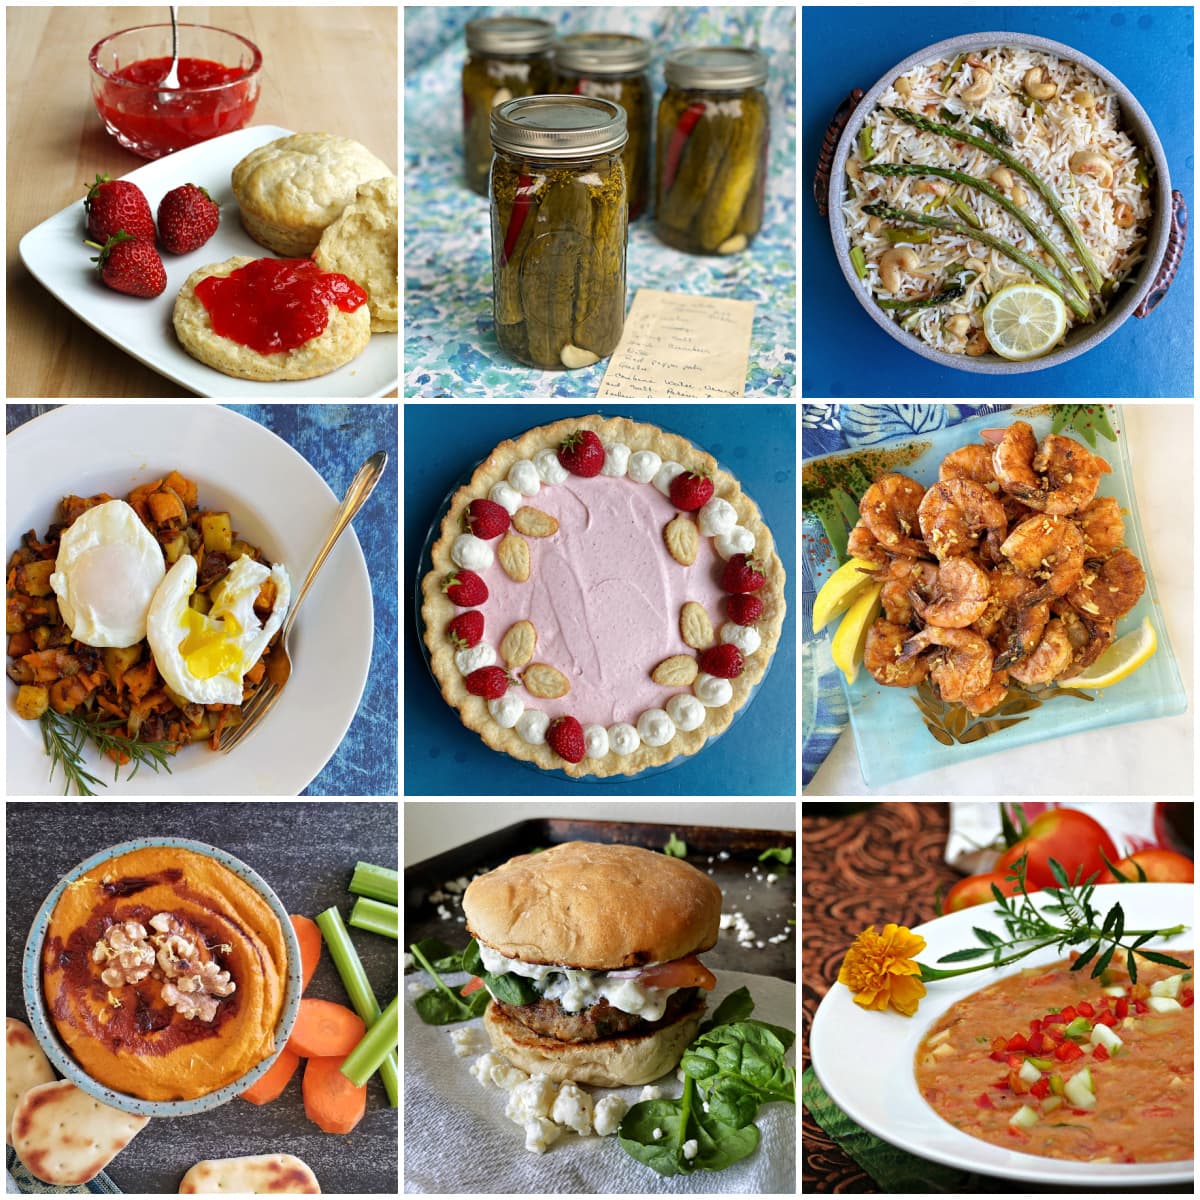 9-panel collage showing images of food and recipes from May Food Holidays calendar.